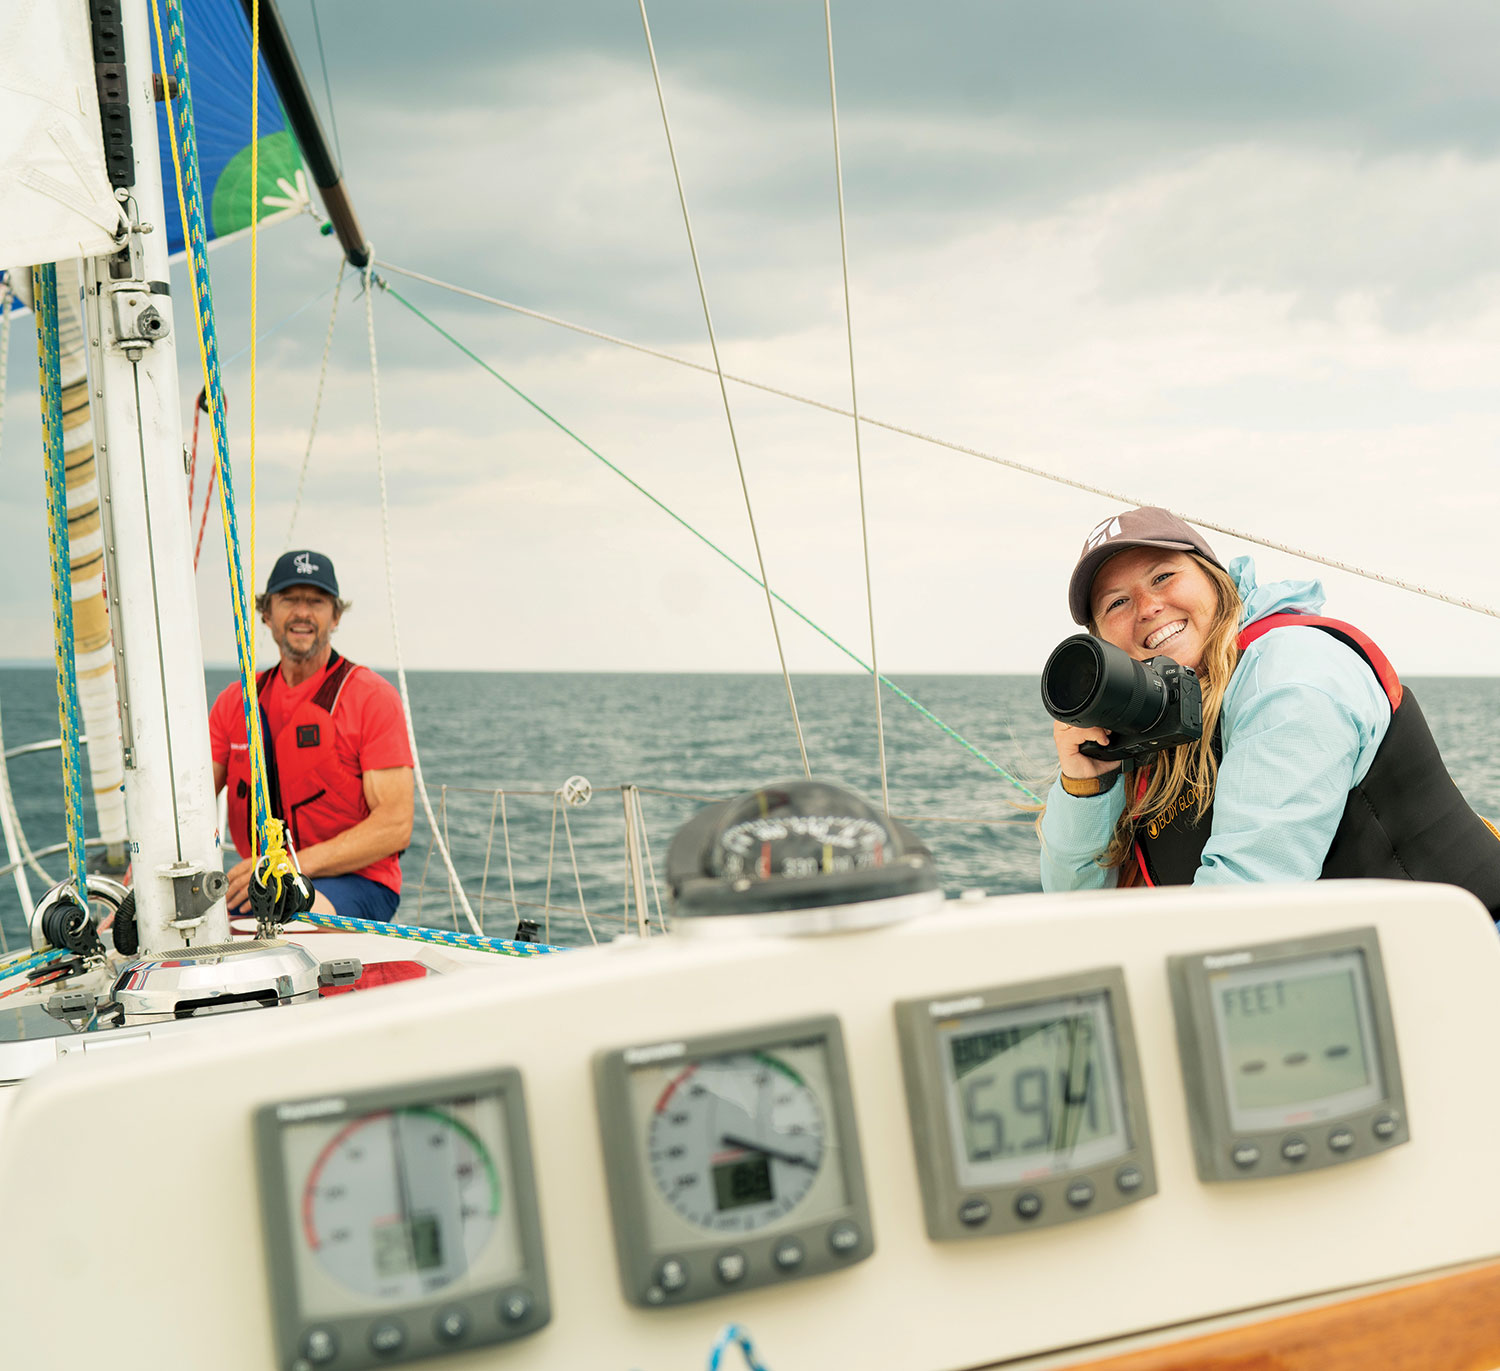 On The Bay contributing photographer Jenna Kitchings captured local “seasoned athletes” in action on the waters of Georgian Bay for our feature story, “Never Too Late,” page 94. Here is Kitchings with champion sailor Adrian van den Hoven out on his 33-foot Mirage, Ophir II.